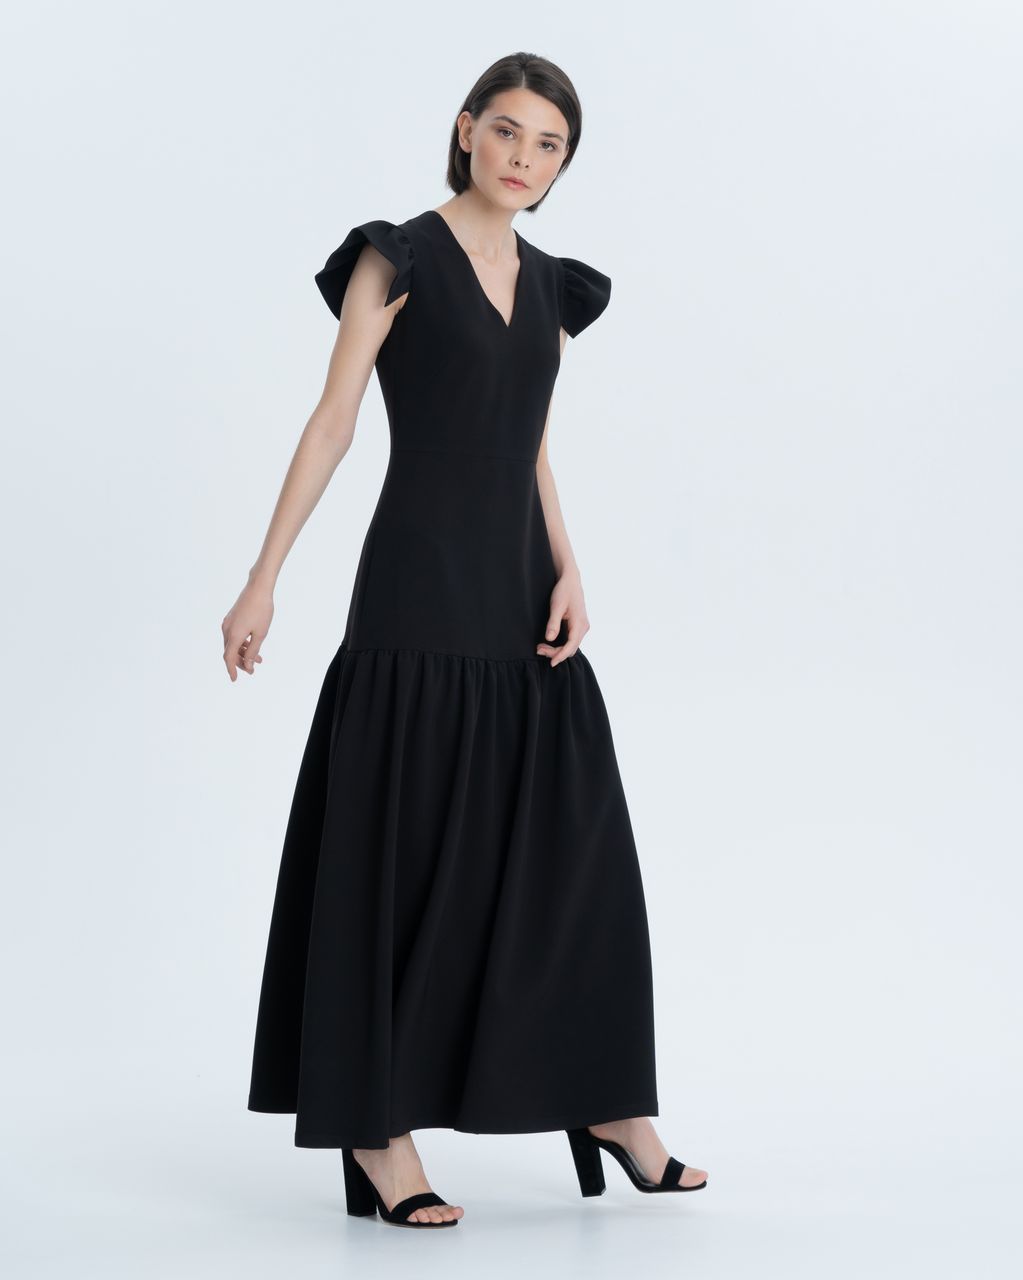 Evening dress made of thick crepe with geometric wing sleeves. An exquisite minimalistic silhouette, a longitudinal cutout and a cut-off flowing flounce make it versatile for any occasion and type of figure.